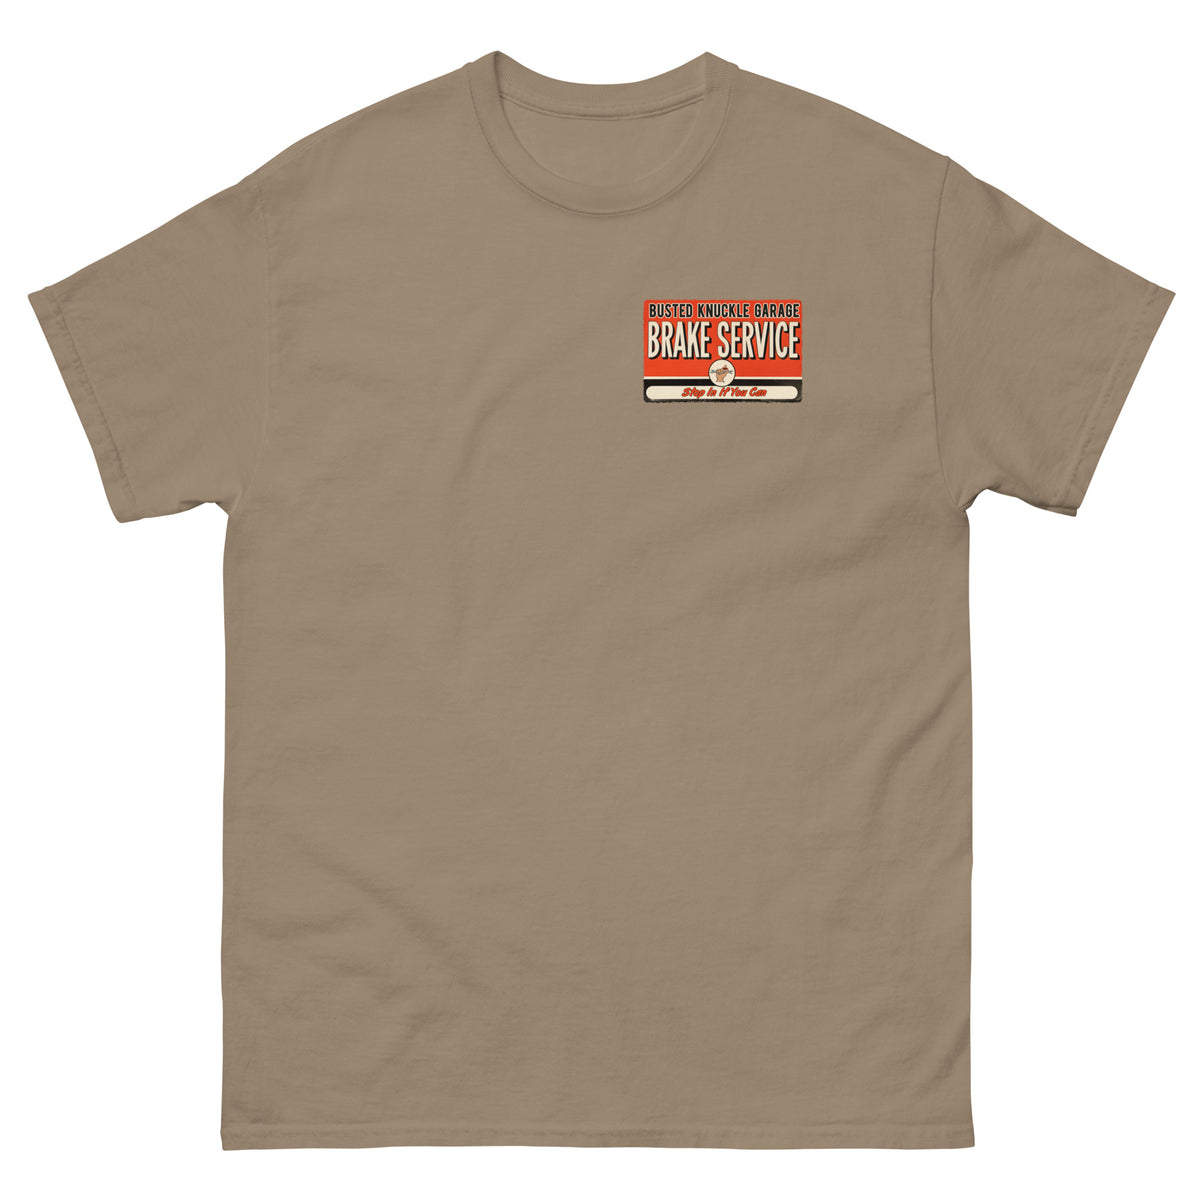 Busted Knuckle Garage Carguy Brake-Service Two-Sided Car Guy T-Shirt